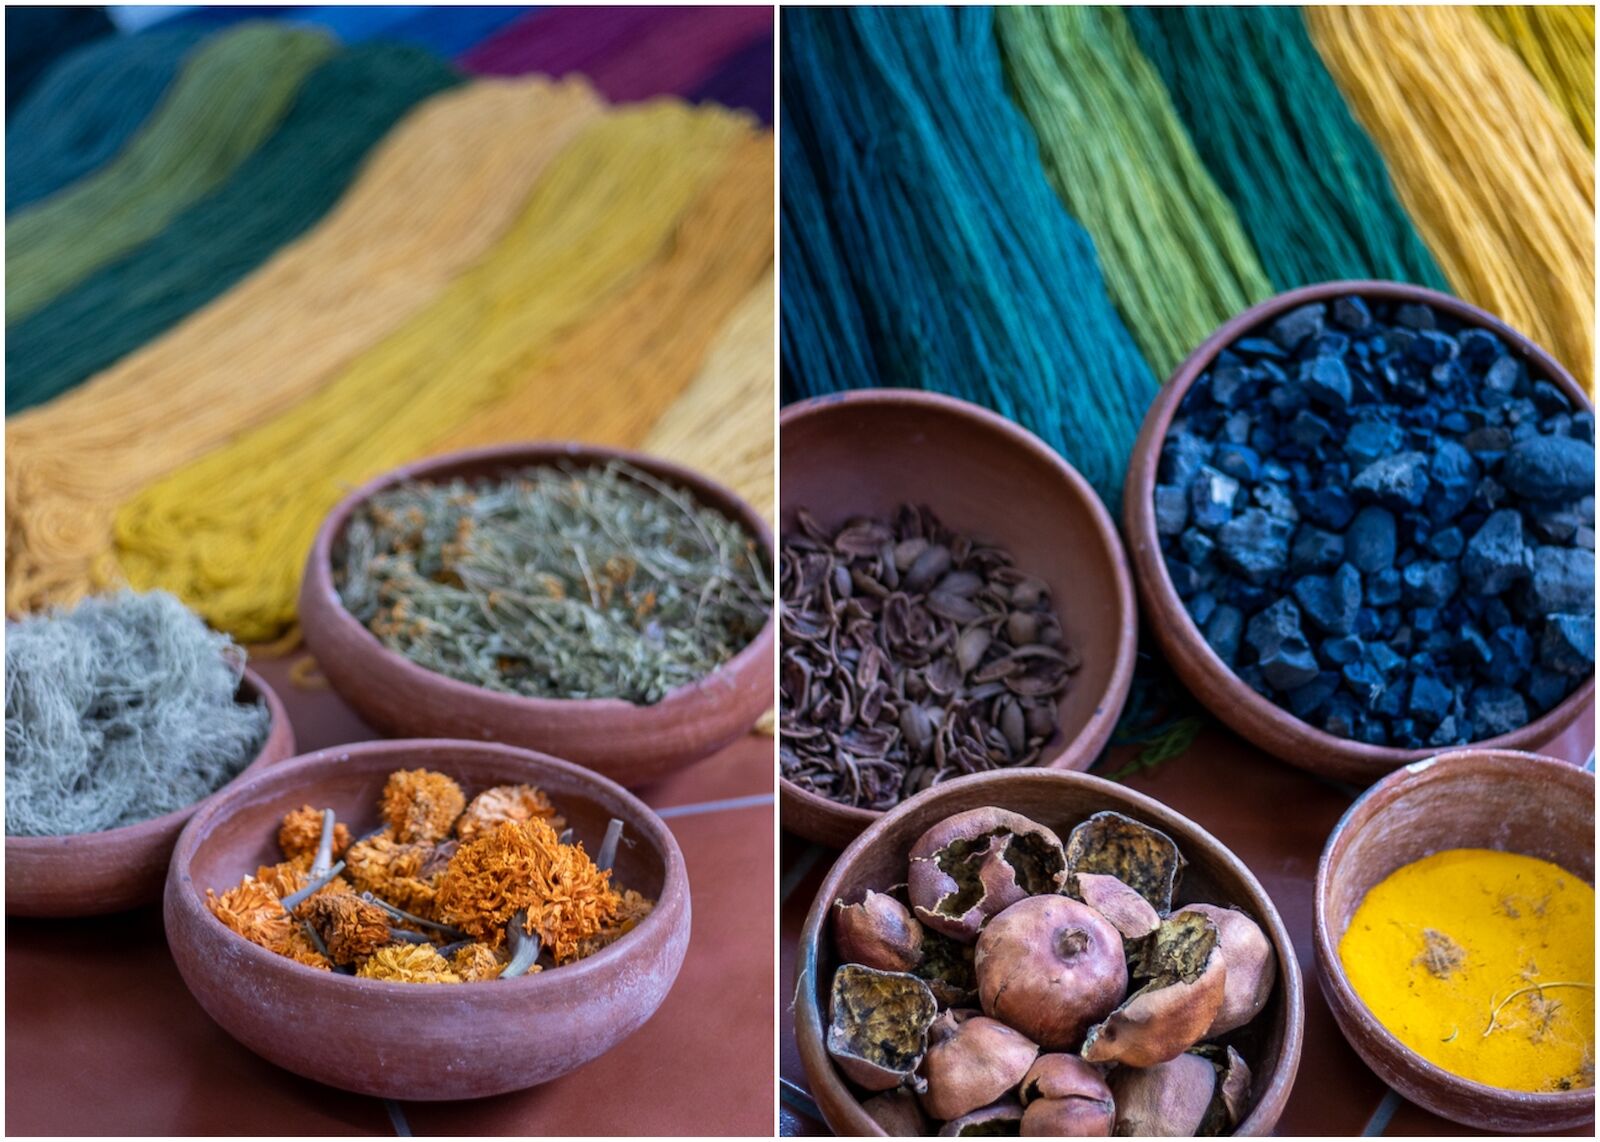 Natural ingredients used for dyes fibers for Zapotec rugs include pomegranate husks and marigold flowers